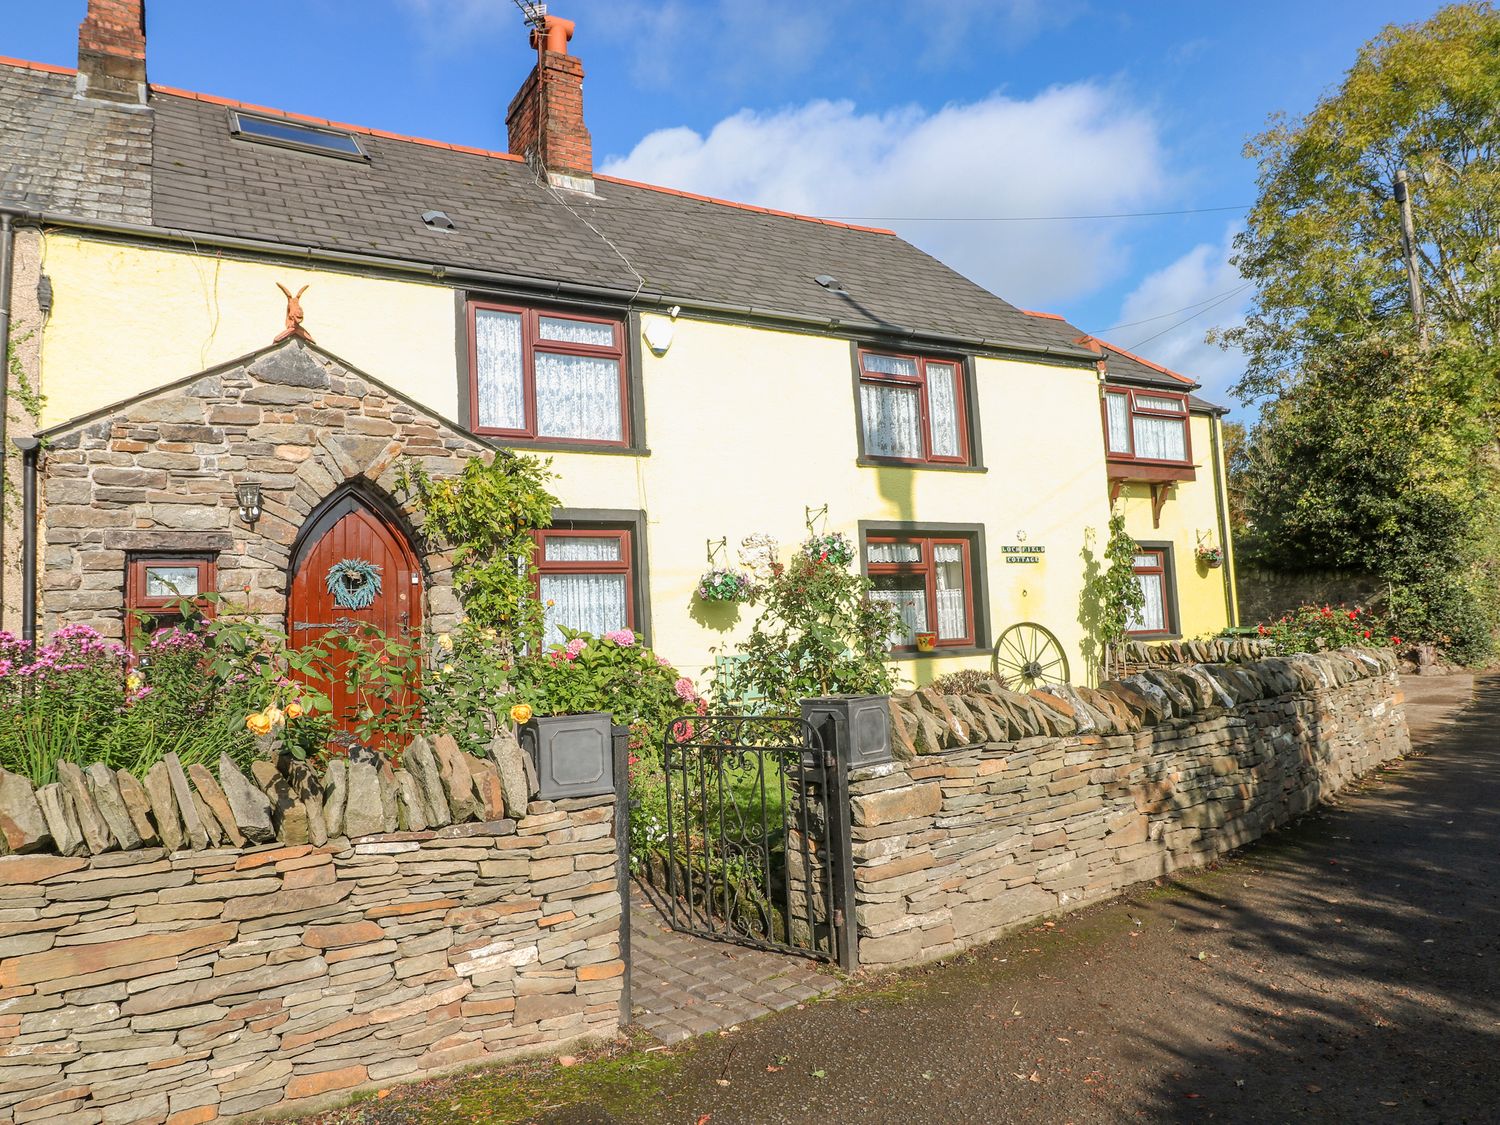 Loch Field Cottage - South Wales - 1113933 - photo 1